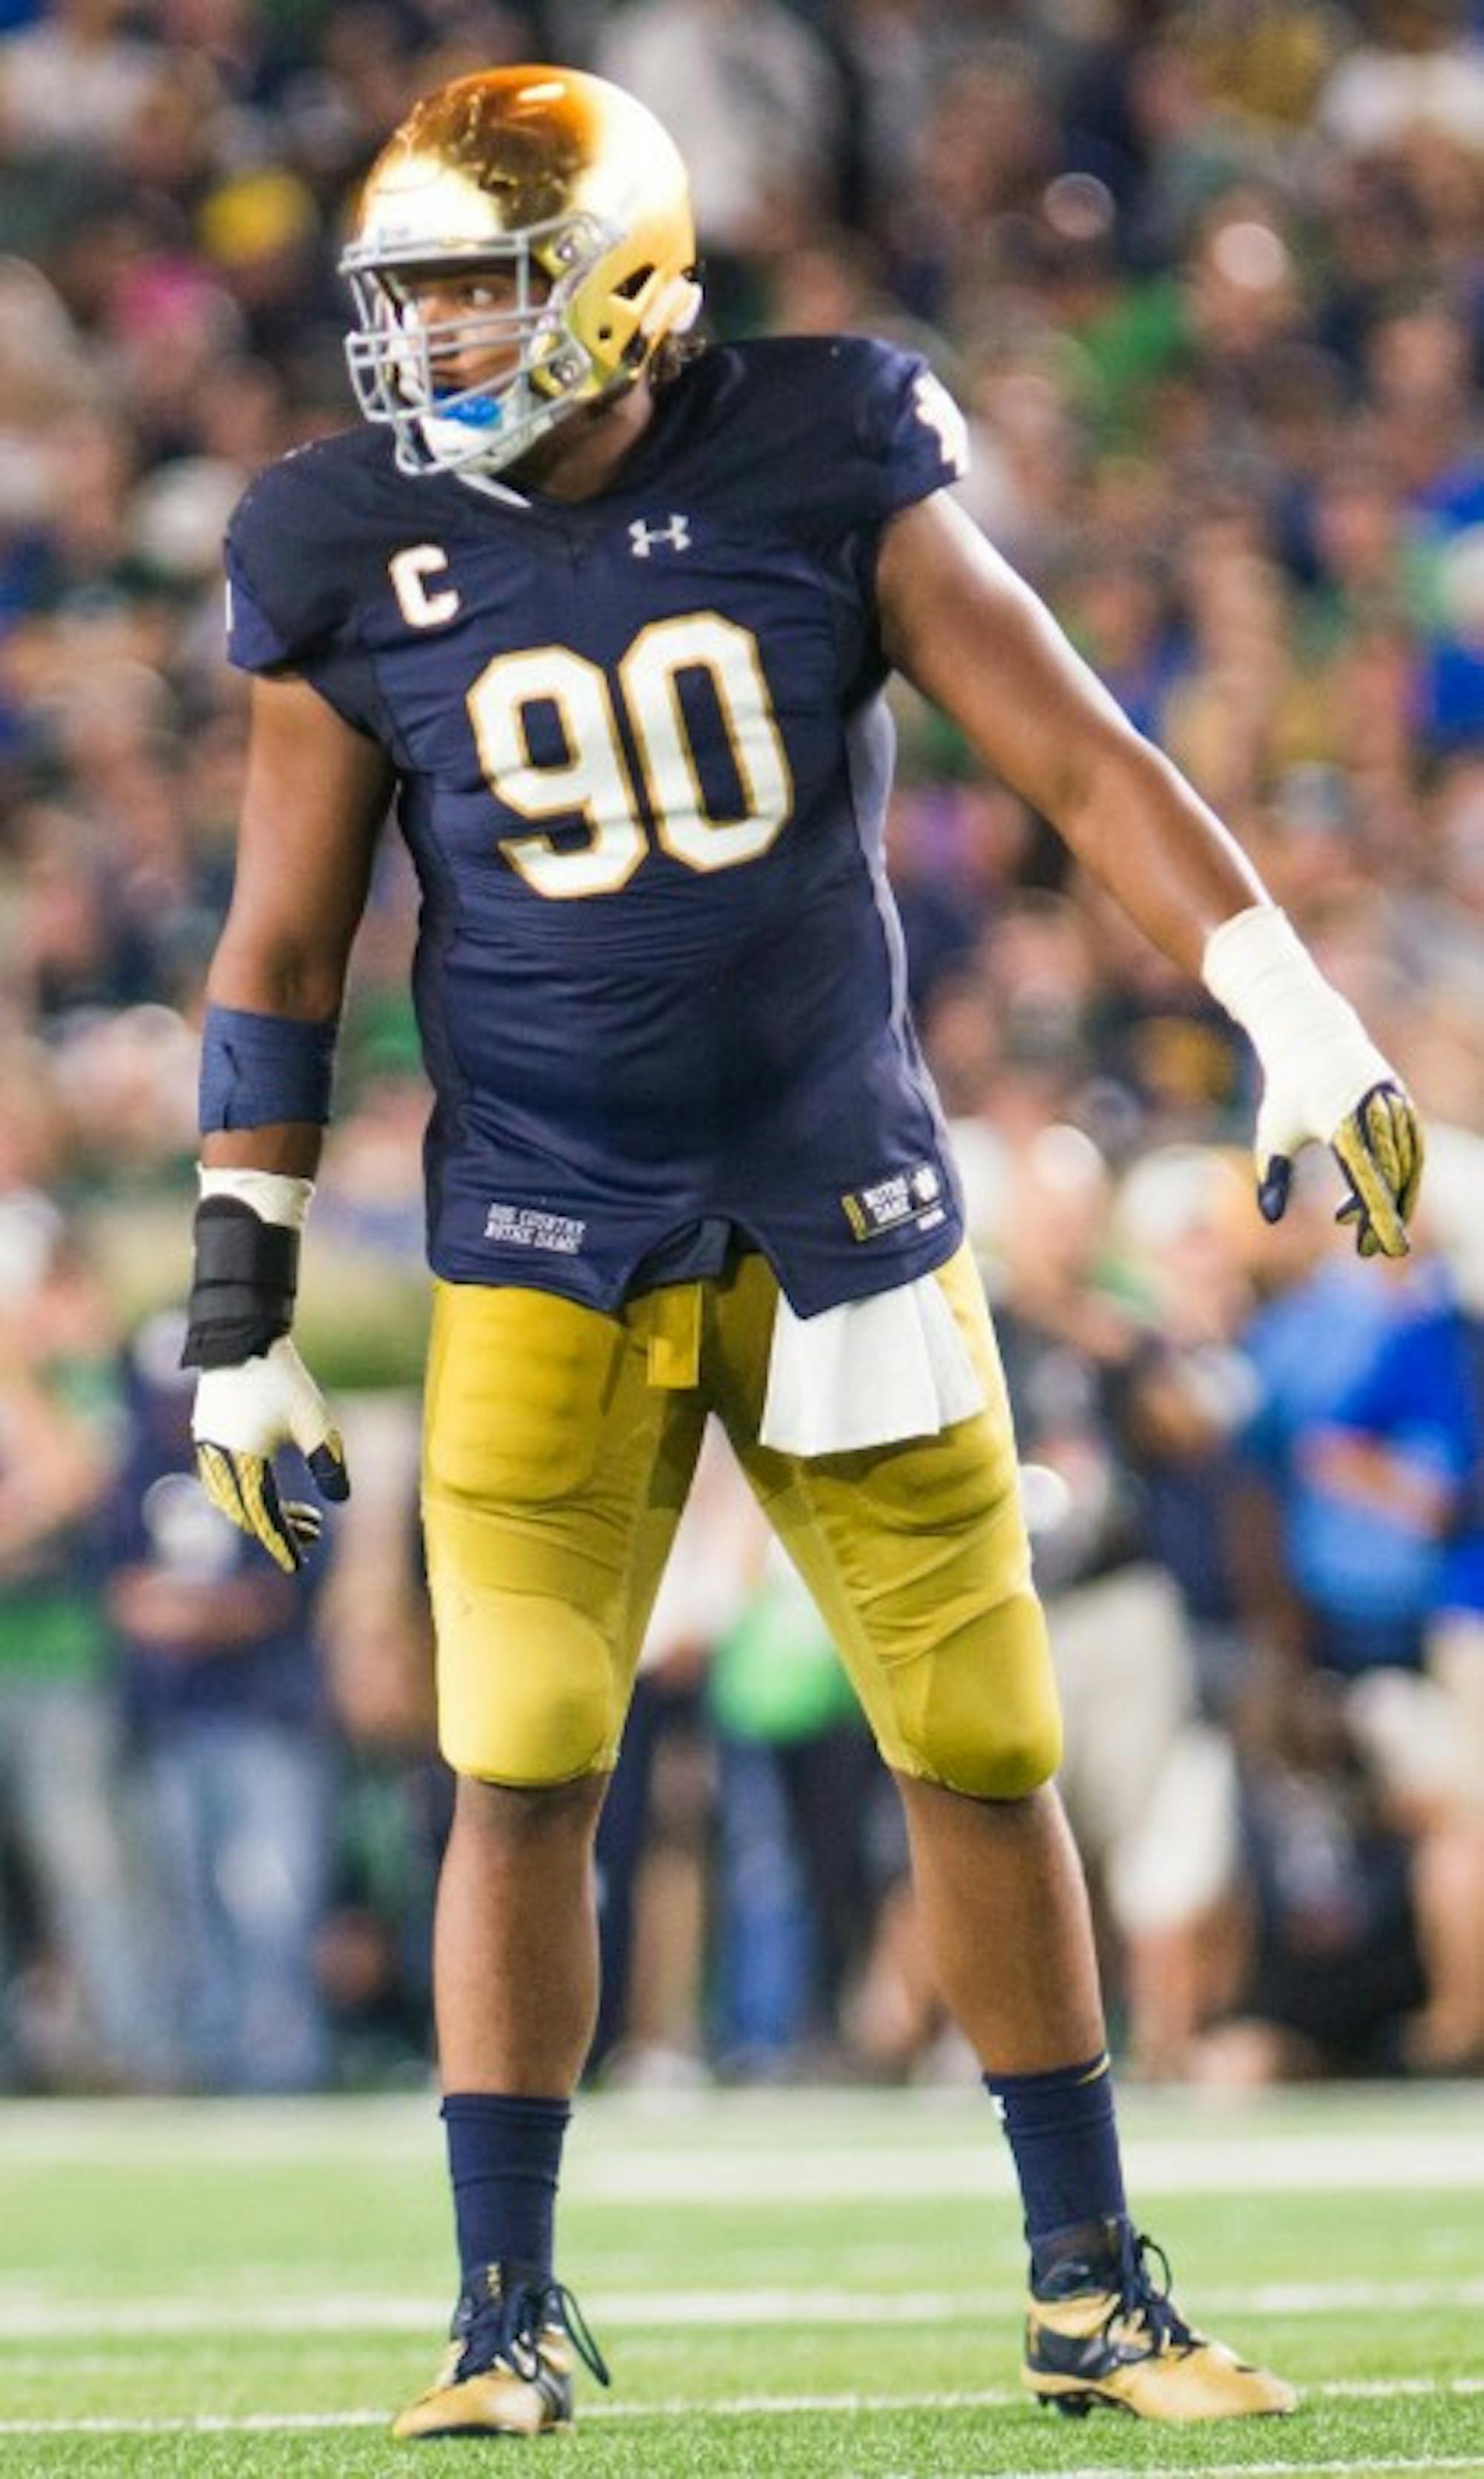 Irish senior defensive lineman Isaac Rochell prepares for a play during Notre Dame’s 36-28 loss against Michigan State. Rochell, one of Notre Dame’s four captains, leads a defensive unit without a sack in 2016.